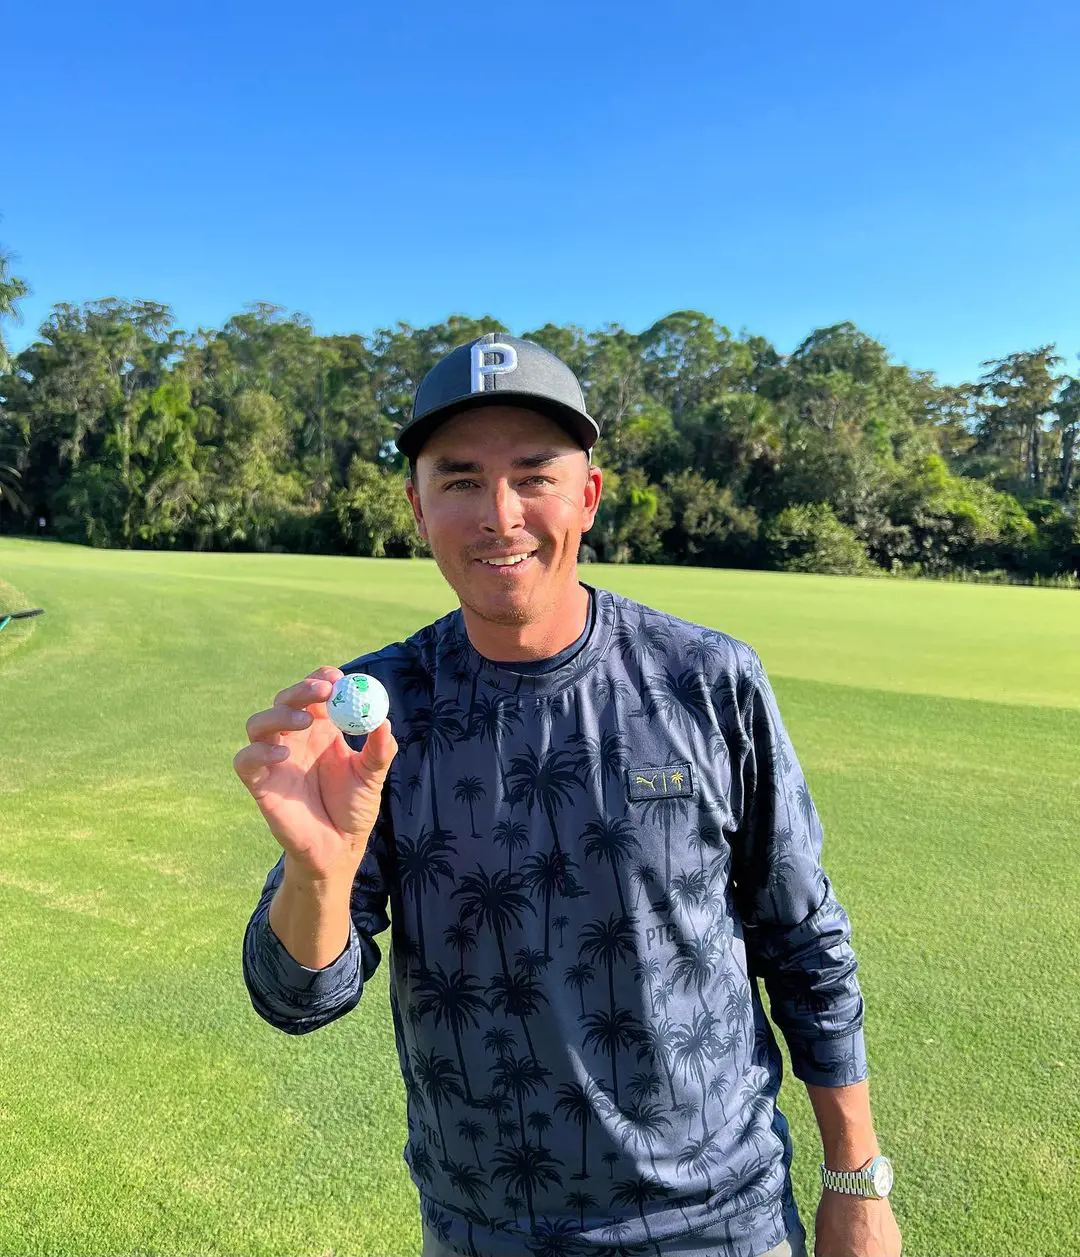 Rickie showing off Taylormade TP5 pix golf ball. 